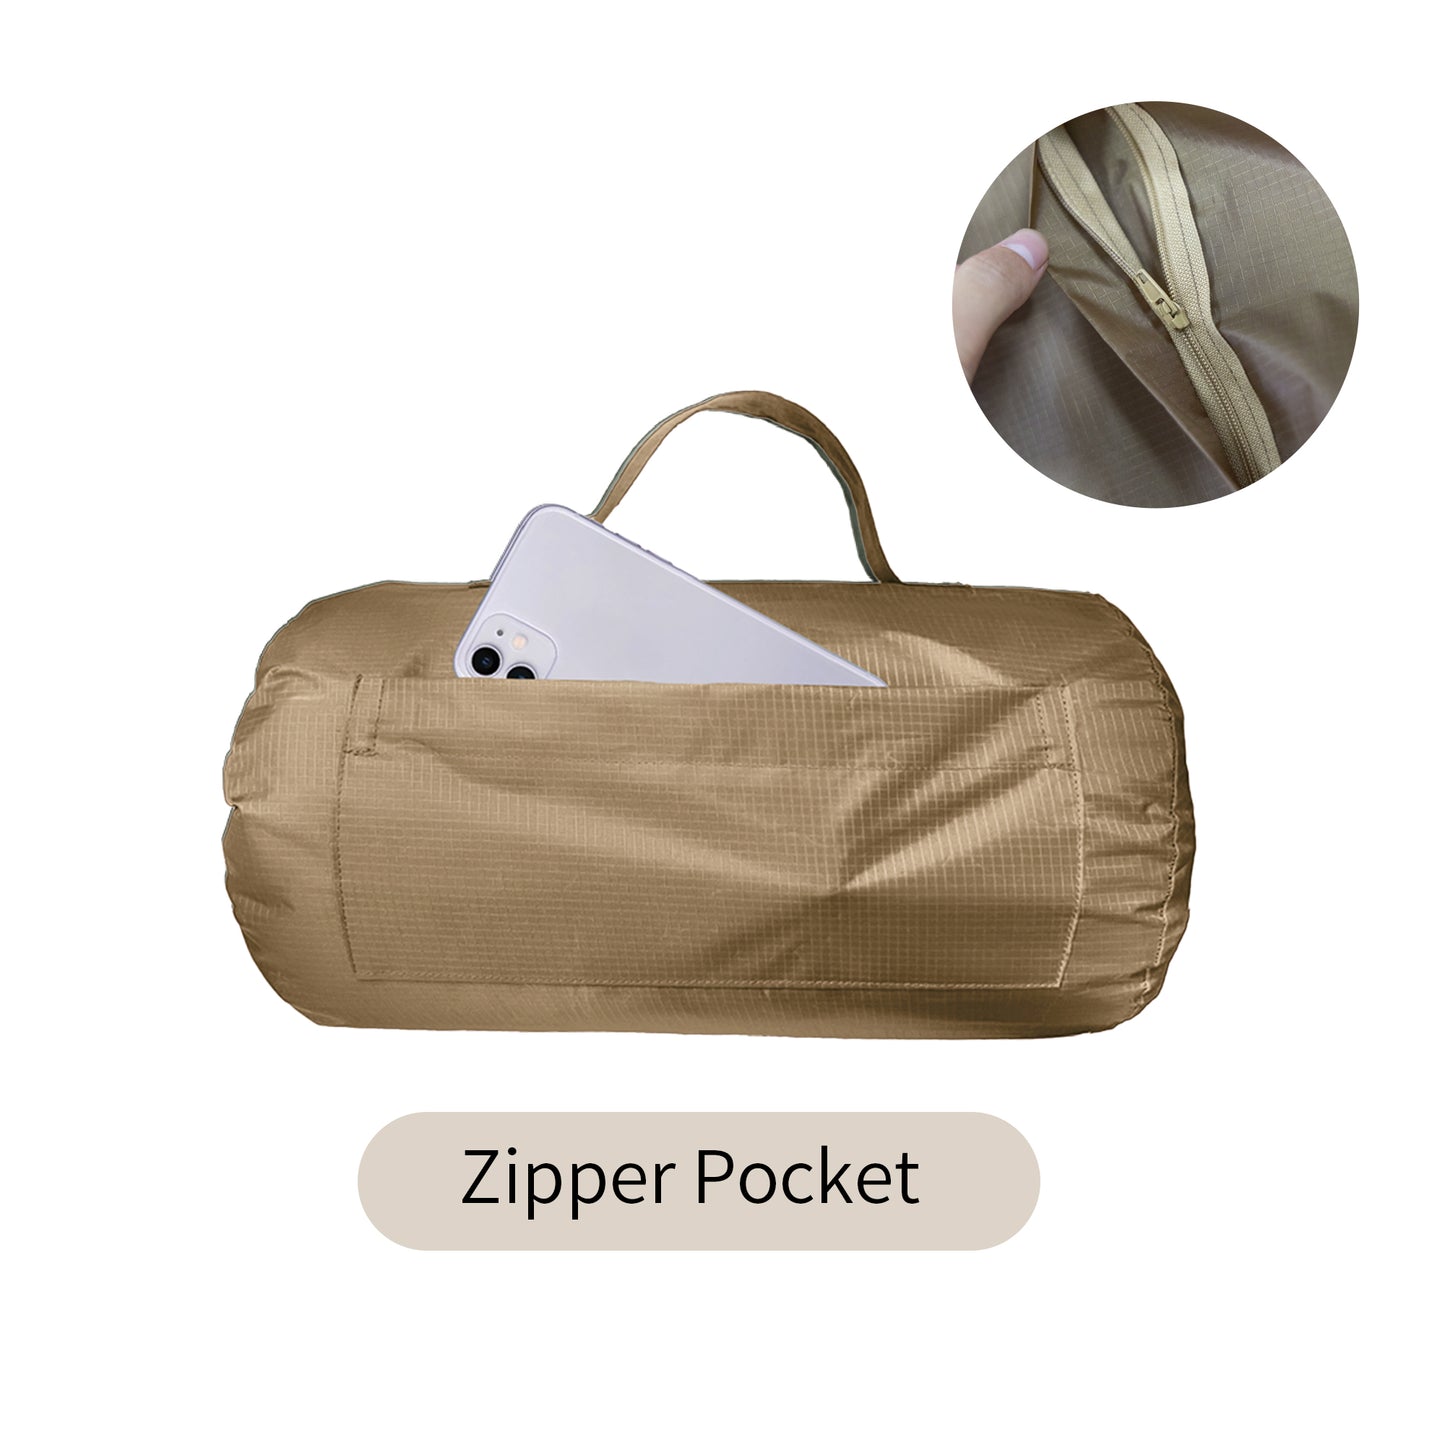 Easy-Carry Utility Blanket for Outdoors